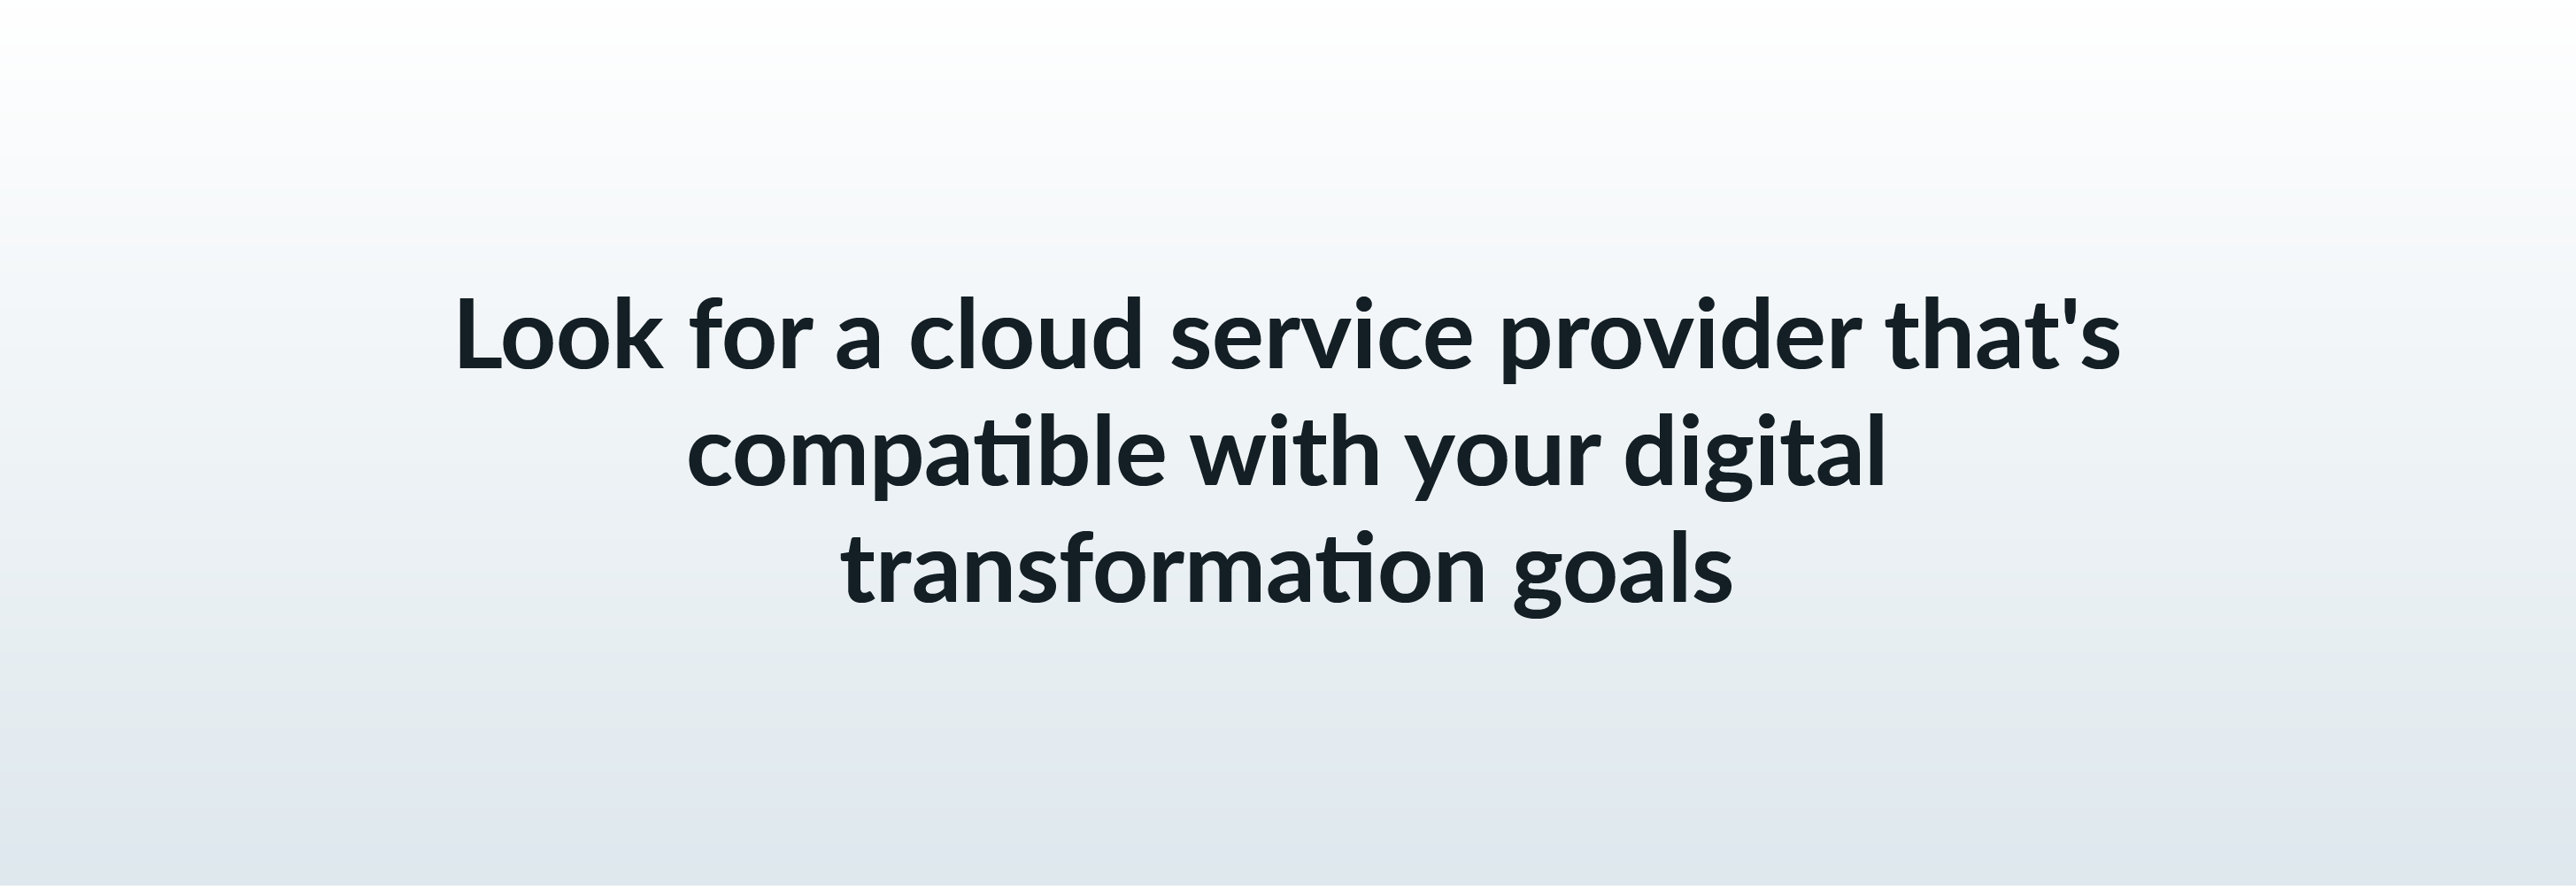 Look for a cloud service provider that's compatible with your digital transformation goals